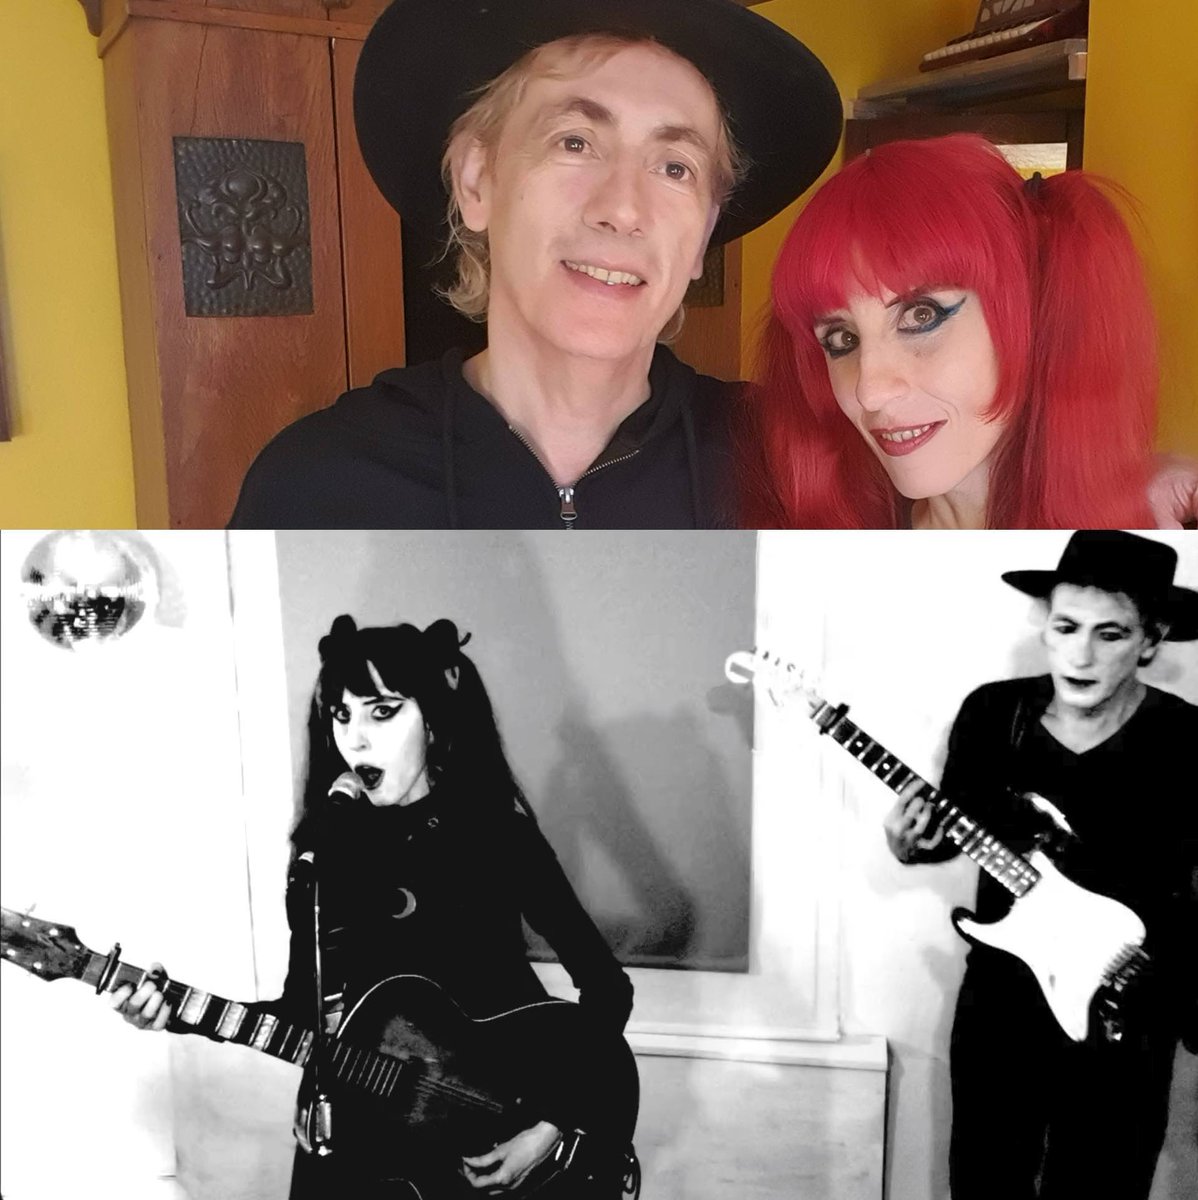 Two moments. Celebrating our anniversary yesterday turning my hair red again, though more fiery than predicted! The existential scream, last week’s performance. Join us, part 2 of #RafAndO #WeAreStars #Live online tomorrow, Tue Apr 23 8pm UK time stageit.com/raf-and-o/1148… ♥️🌟✨